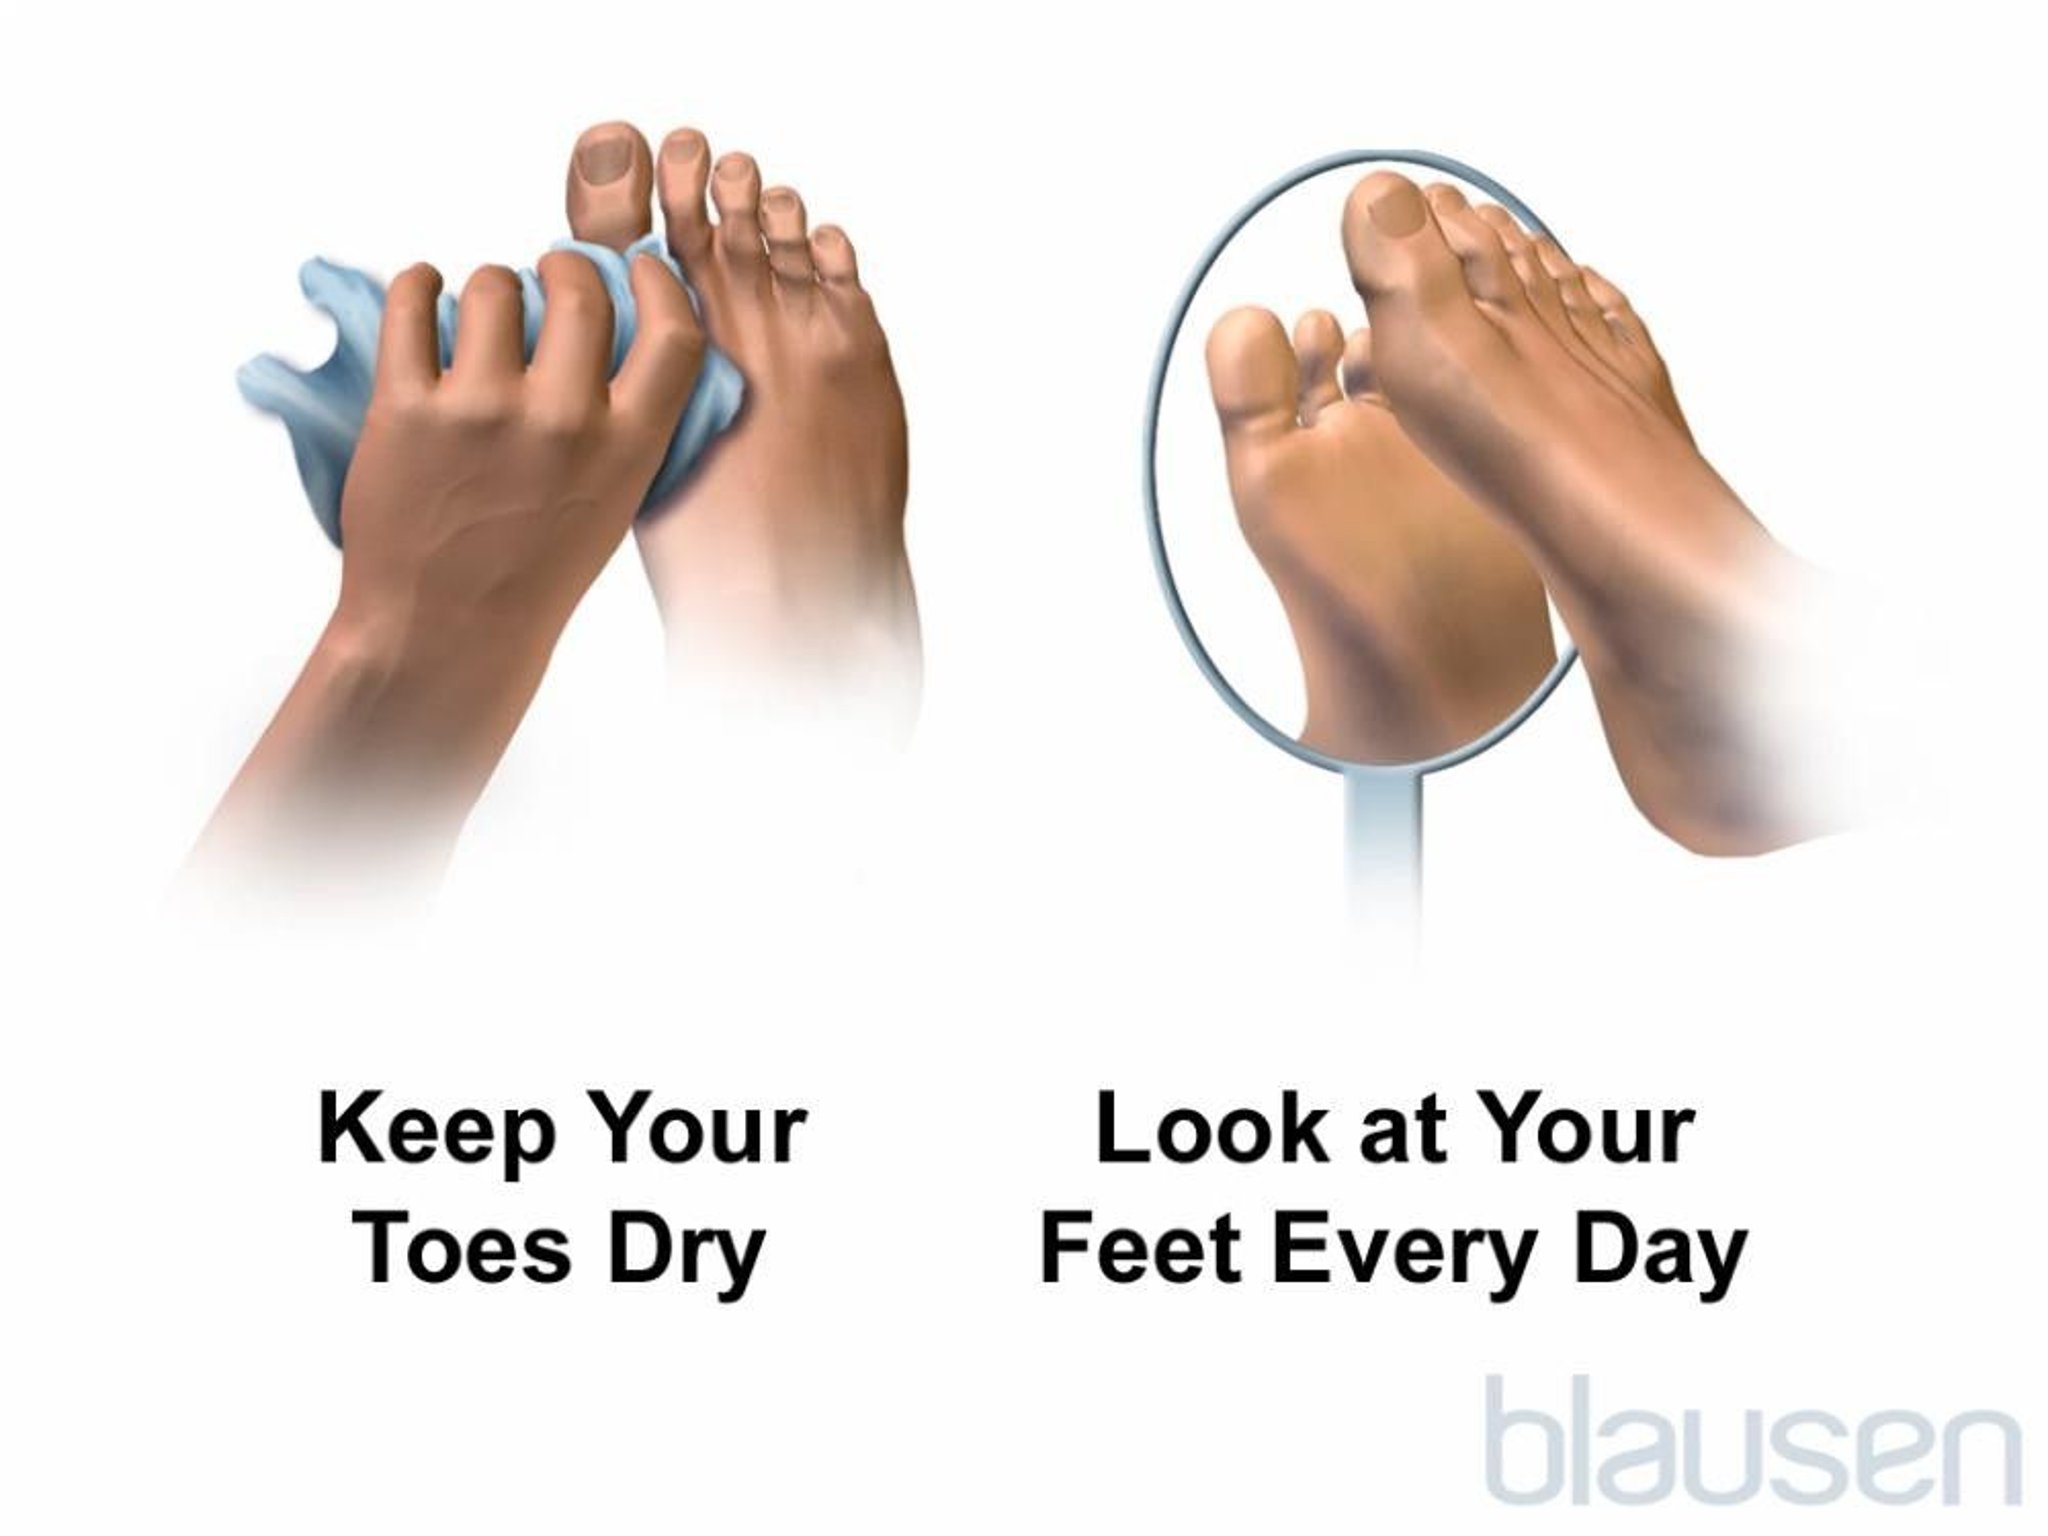 Foot Care for People With Diabetes